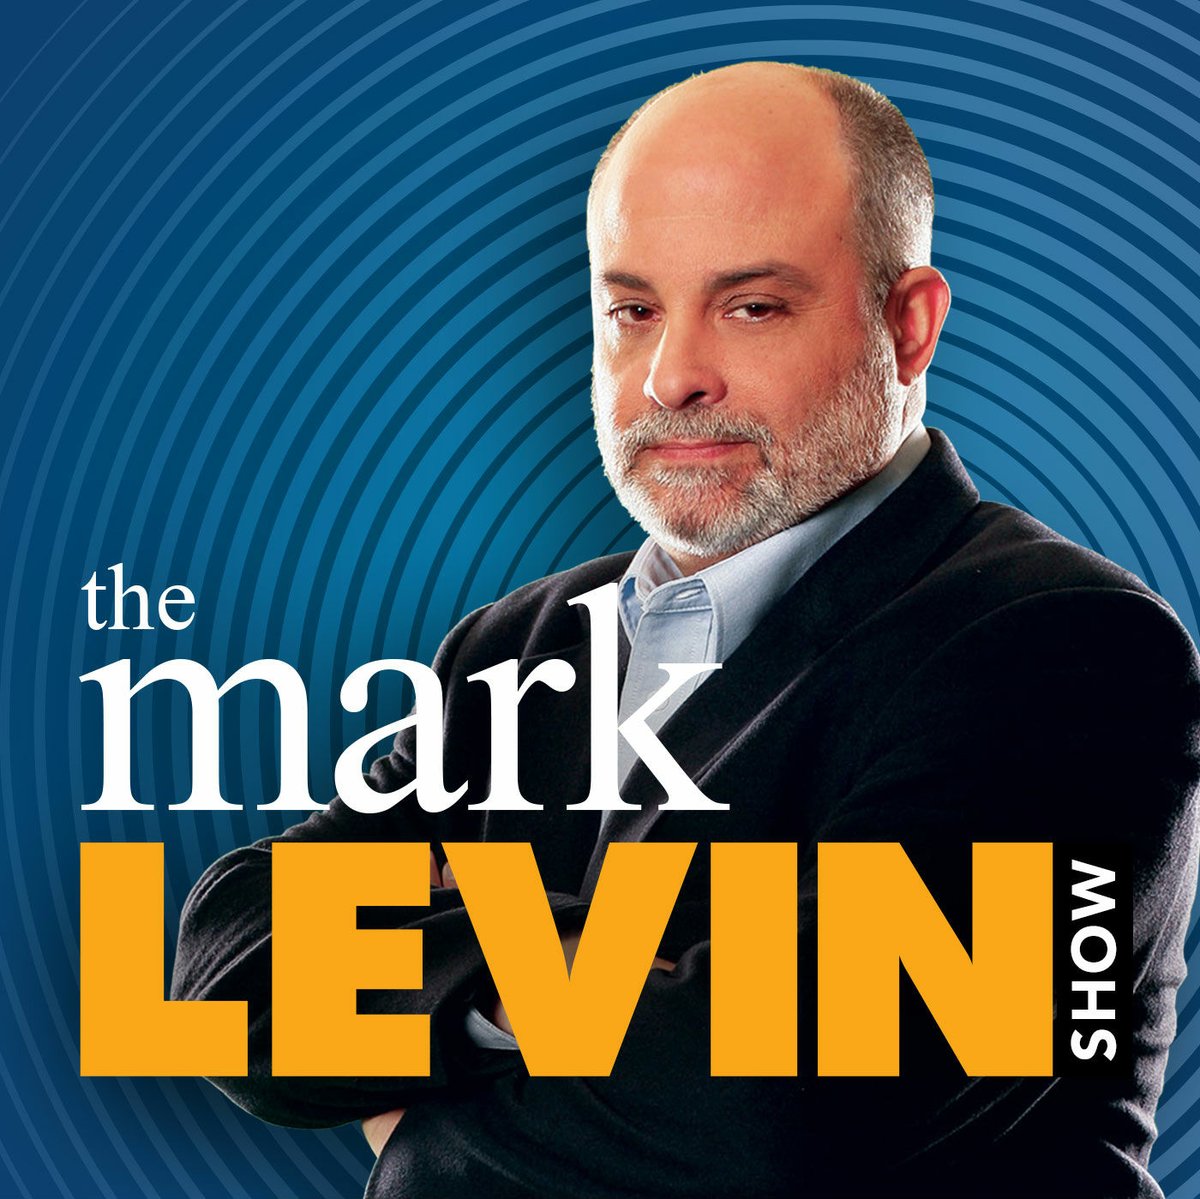 We have a president who won’t stand up to antisemitism - he spreads it. Listen, for free, to the Mark Levin Show podcast now. megaphone.link/WWO7351555099